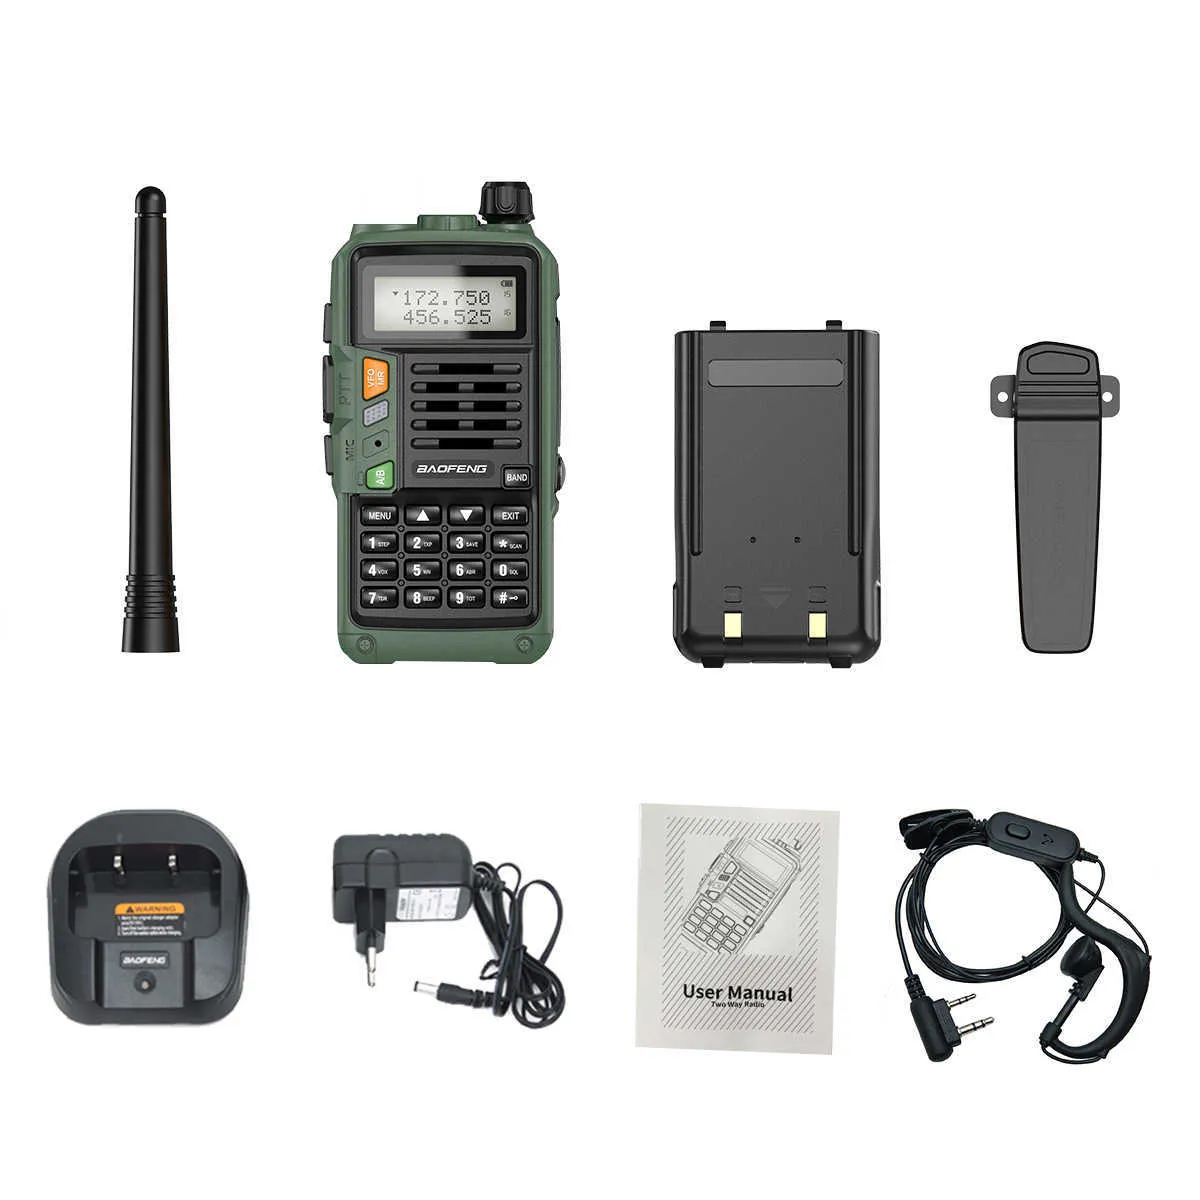 BaoFeng UVS9 Plus Powerful Walkie Talkie CB Radio Transceiver 10W 50 KM Long Range Portable For hunt forest upgrade 2108179521899